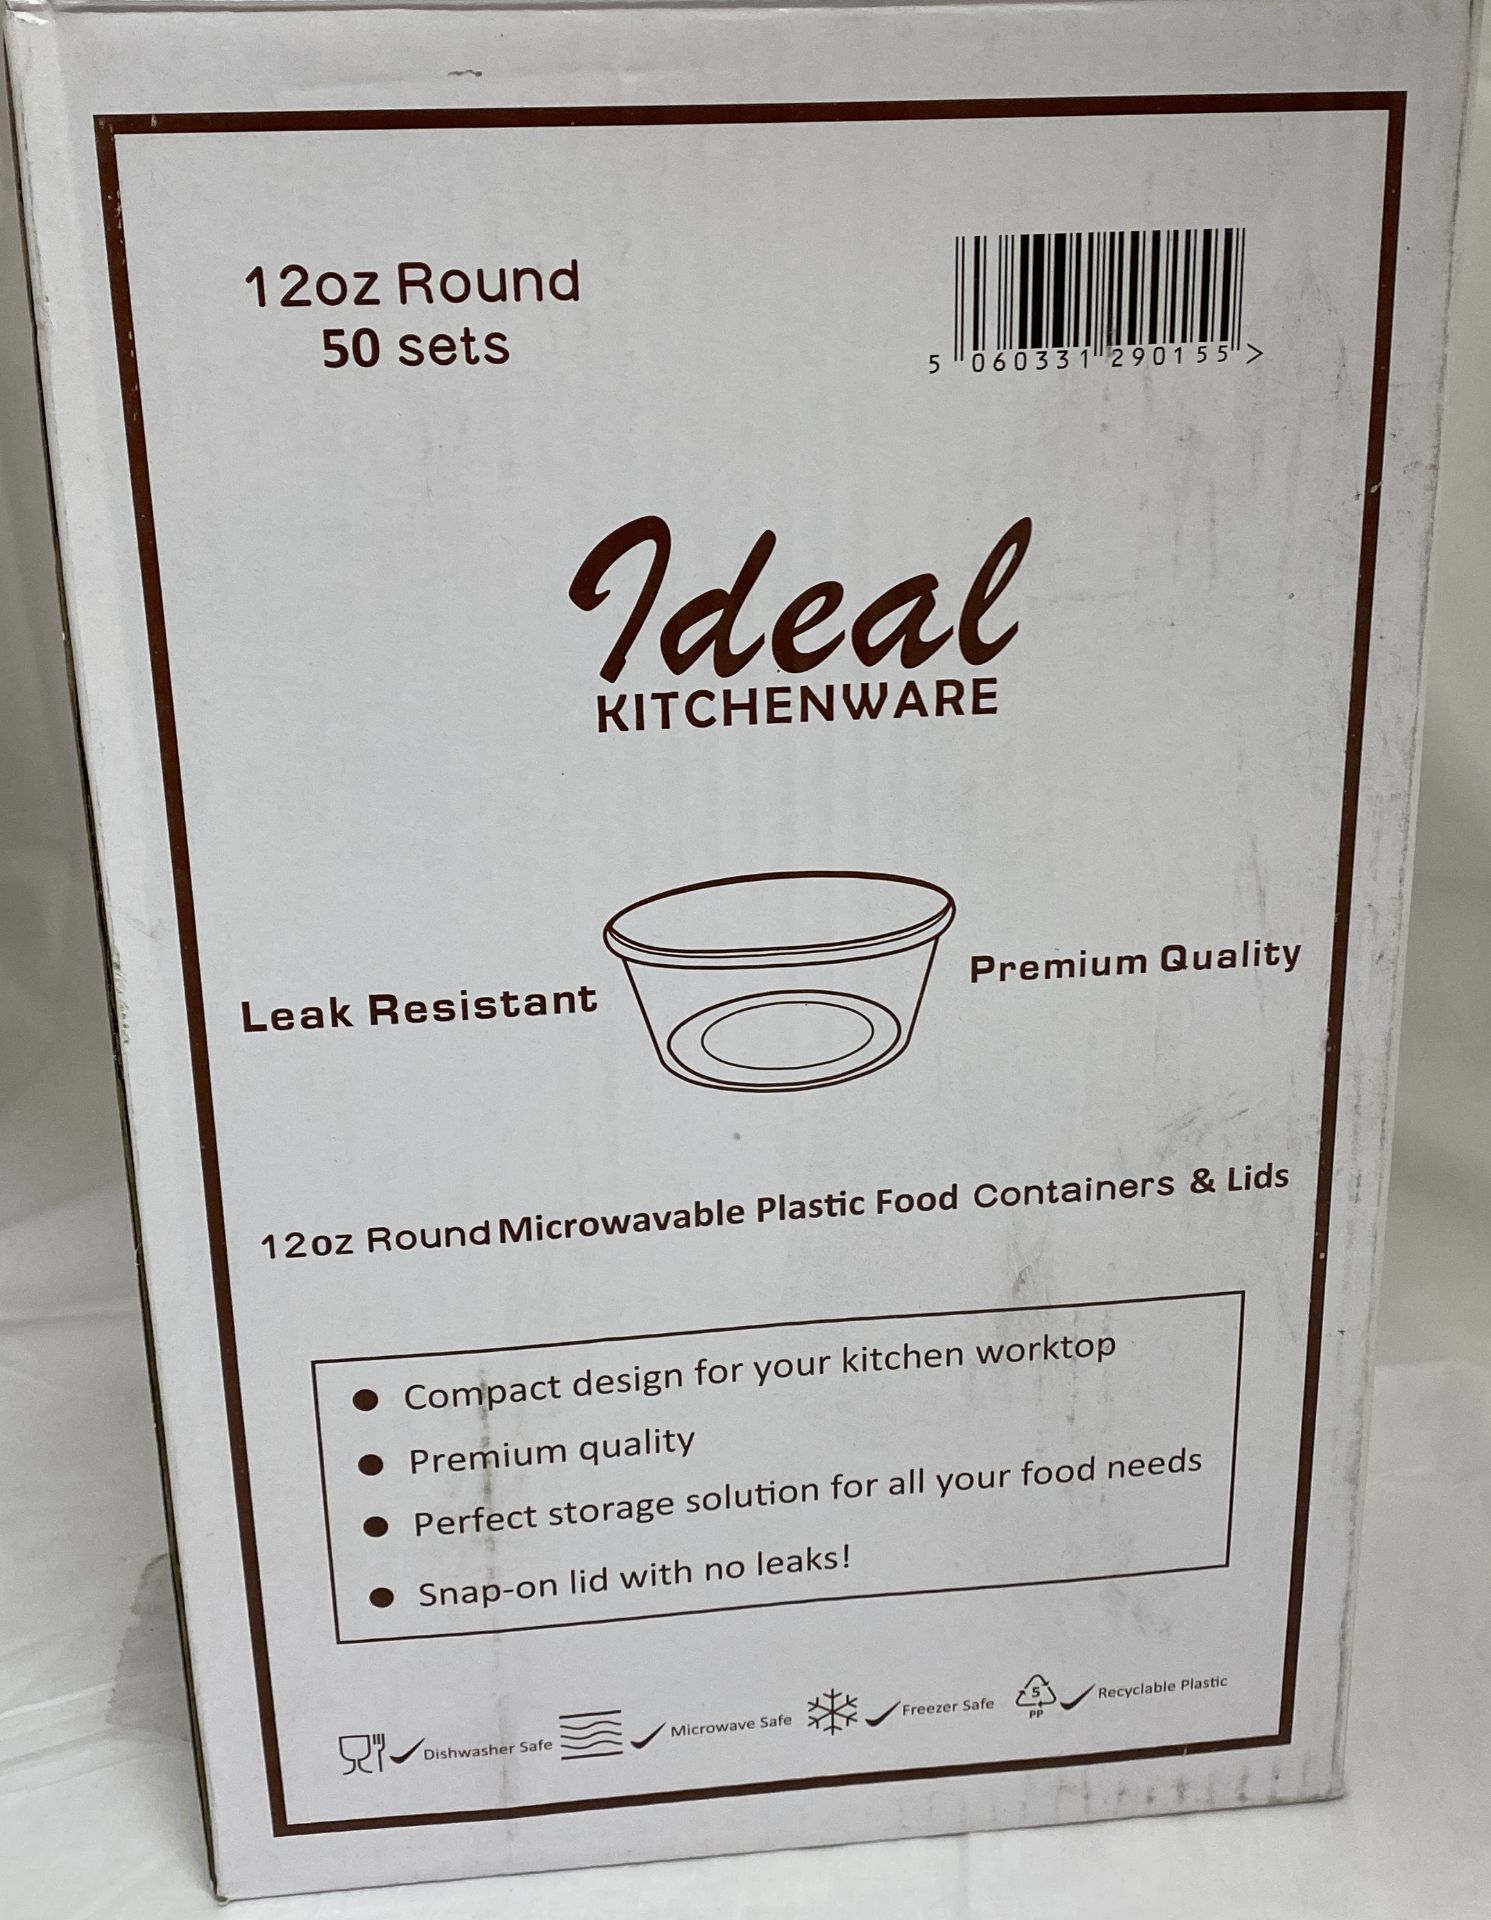 2 x Boxes of 50 Microwavable Foot Containers by Ideal Kitchenware | DSP61 - Image 4 of 4